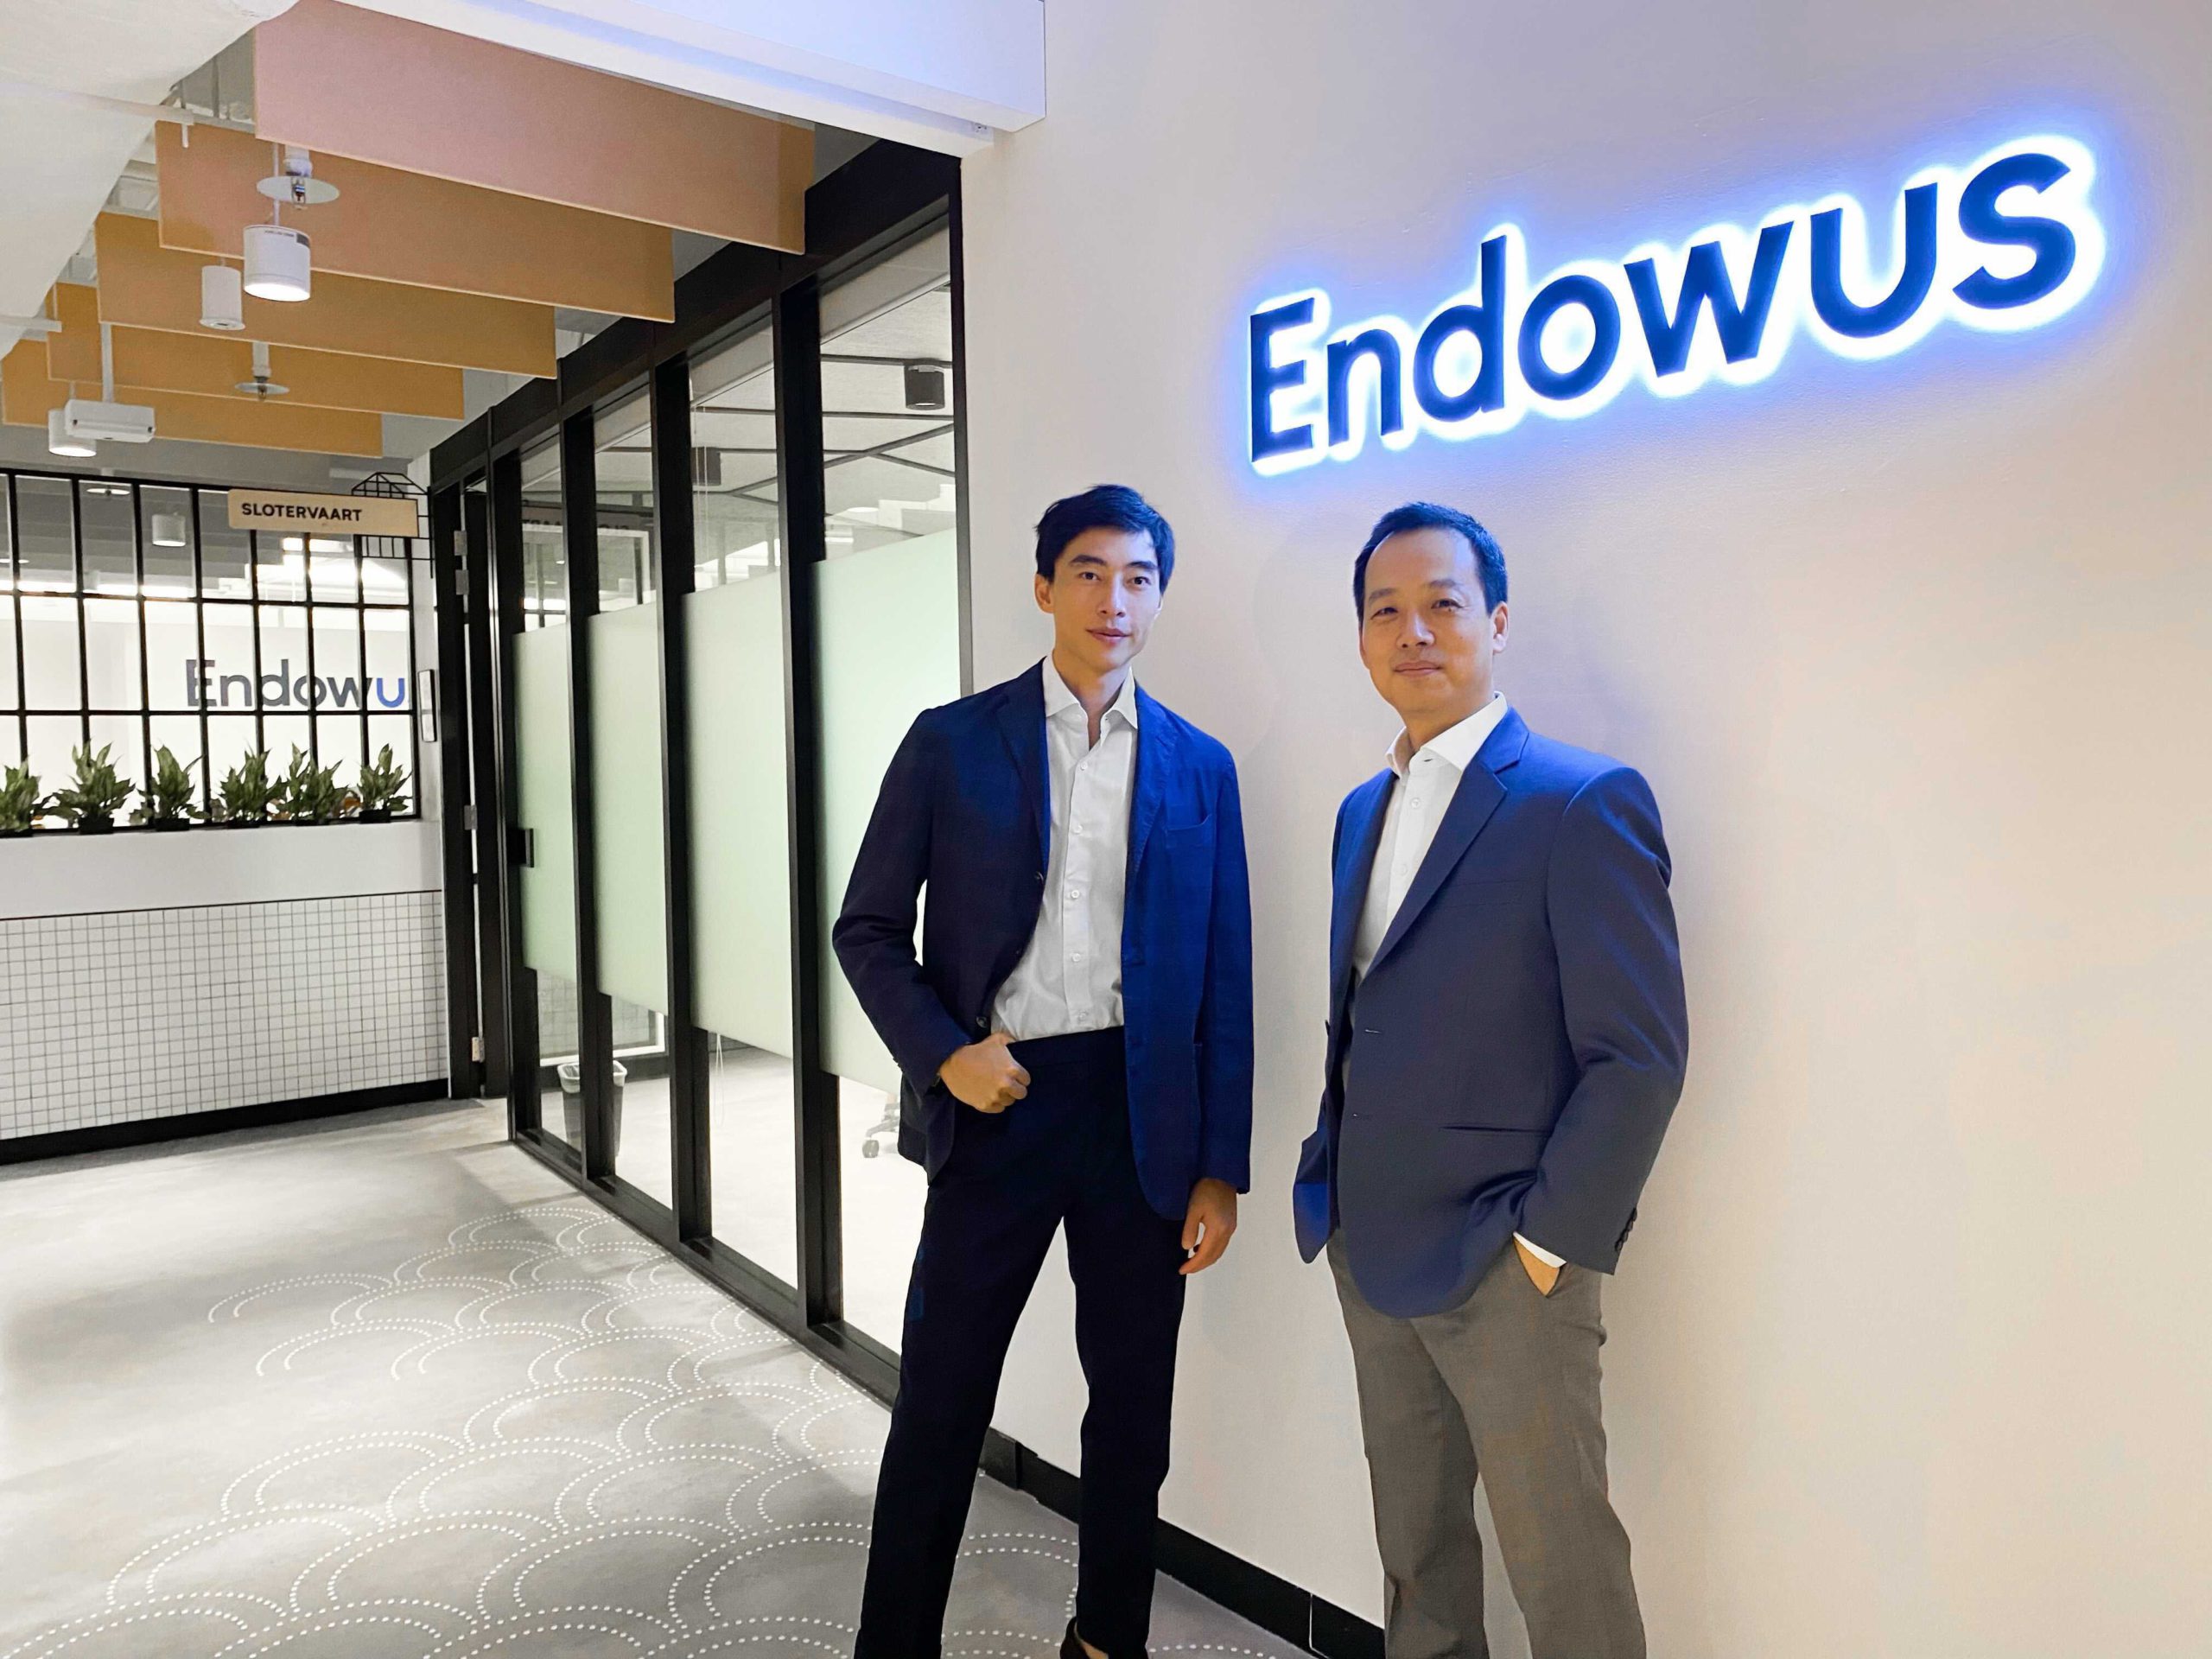 Robo-advisor Endowus steps deeper into Singapore’s crowded wealth management sector